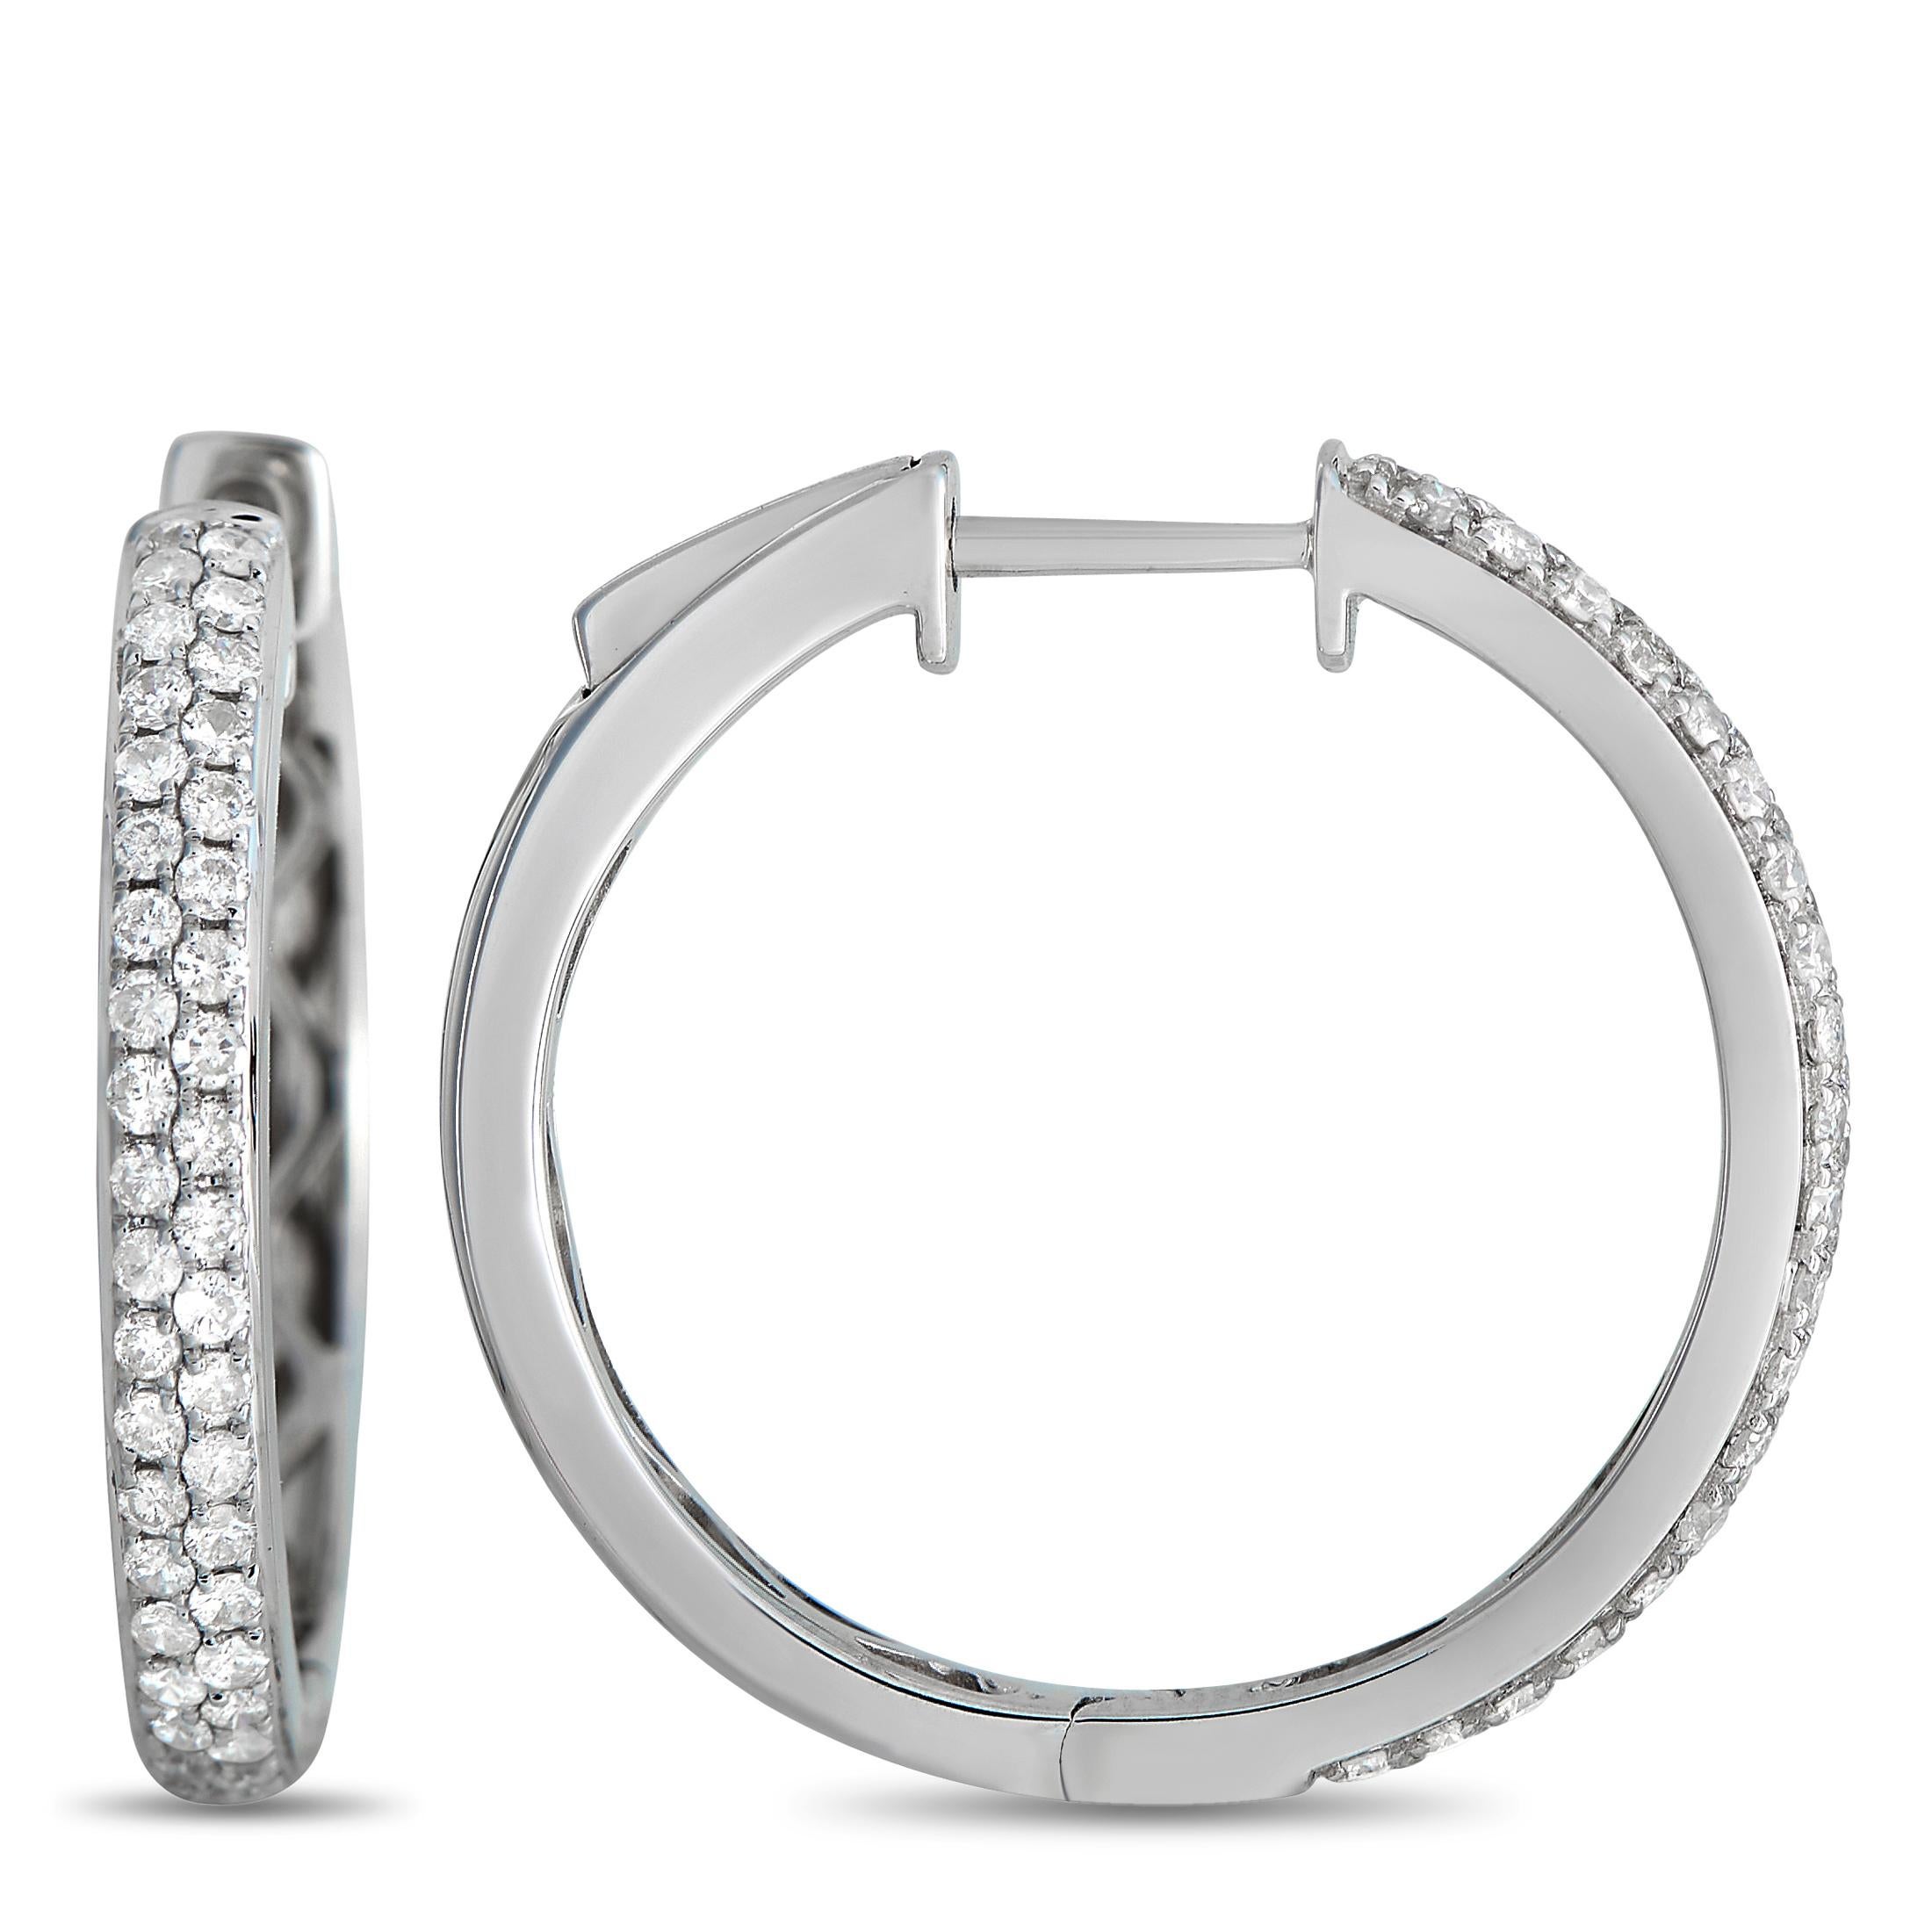 Add a touch of sparkle to any ensemble with the help of these elegant hoop earrings. Each one features an intricate 14K White Gold setting that measures 0.75” round. Diamonds with a total weight of 0.65 carats make them simply unforgettable. 

This